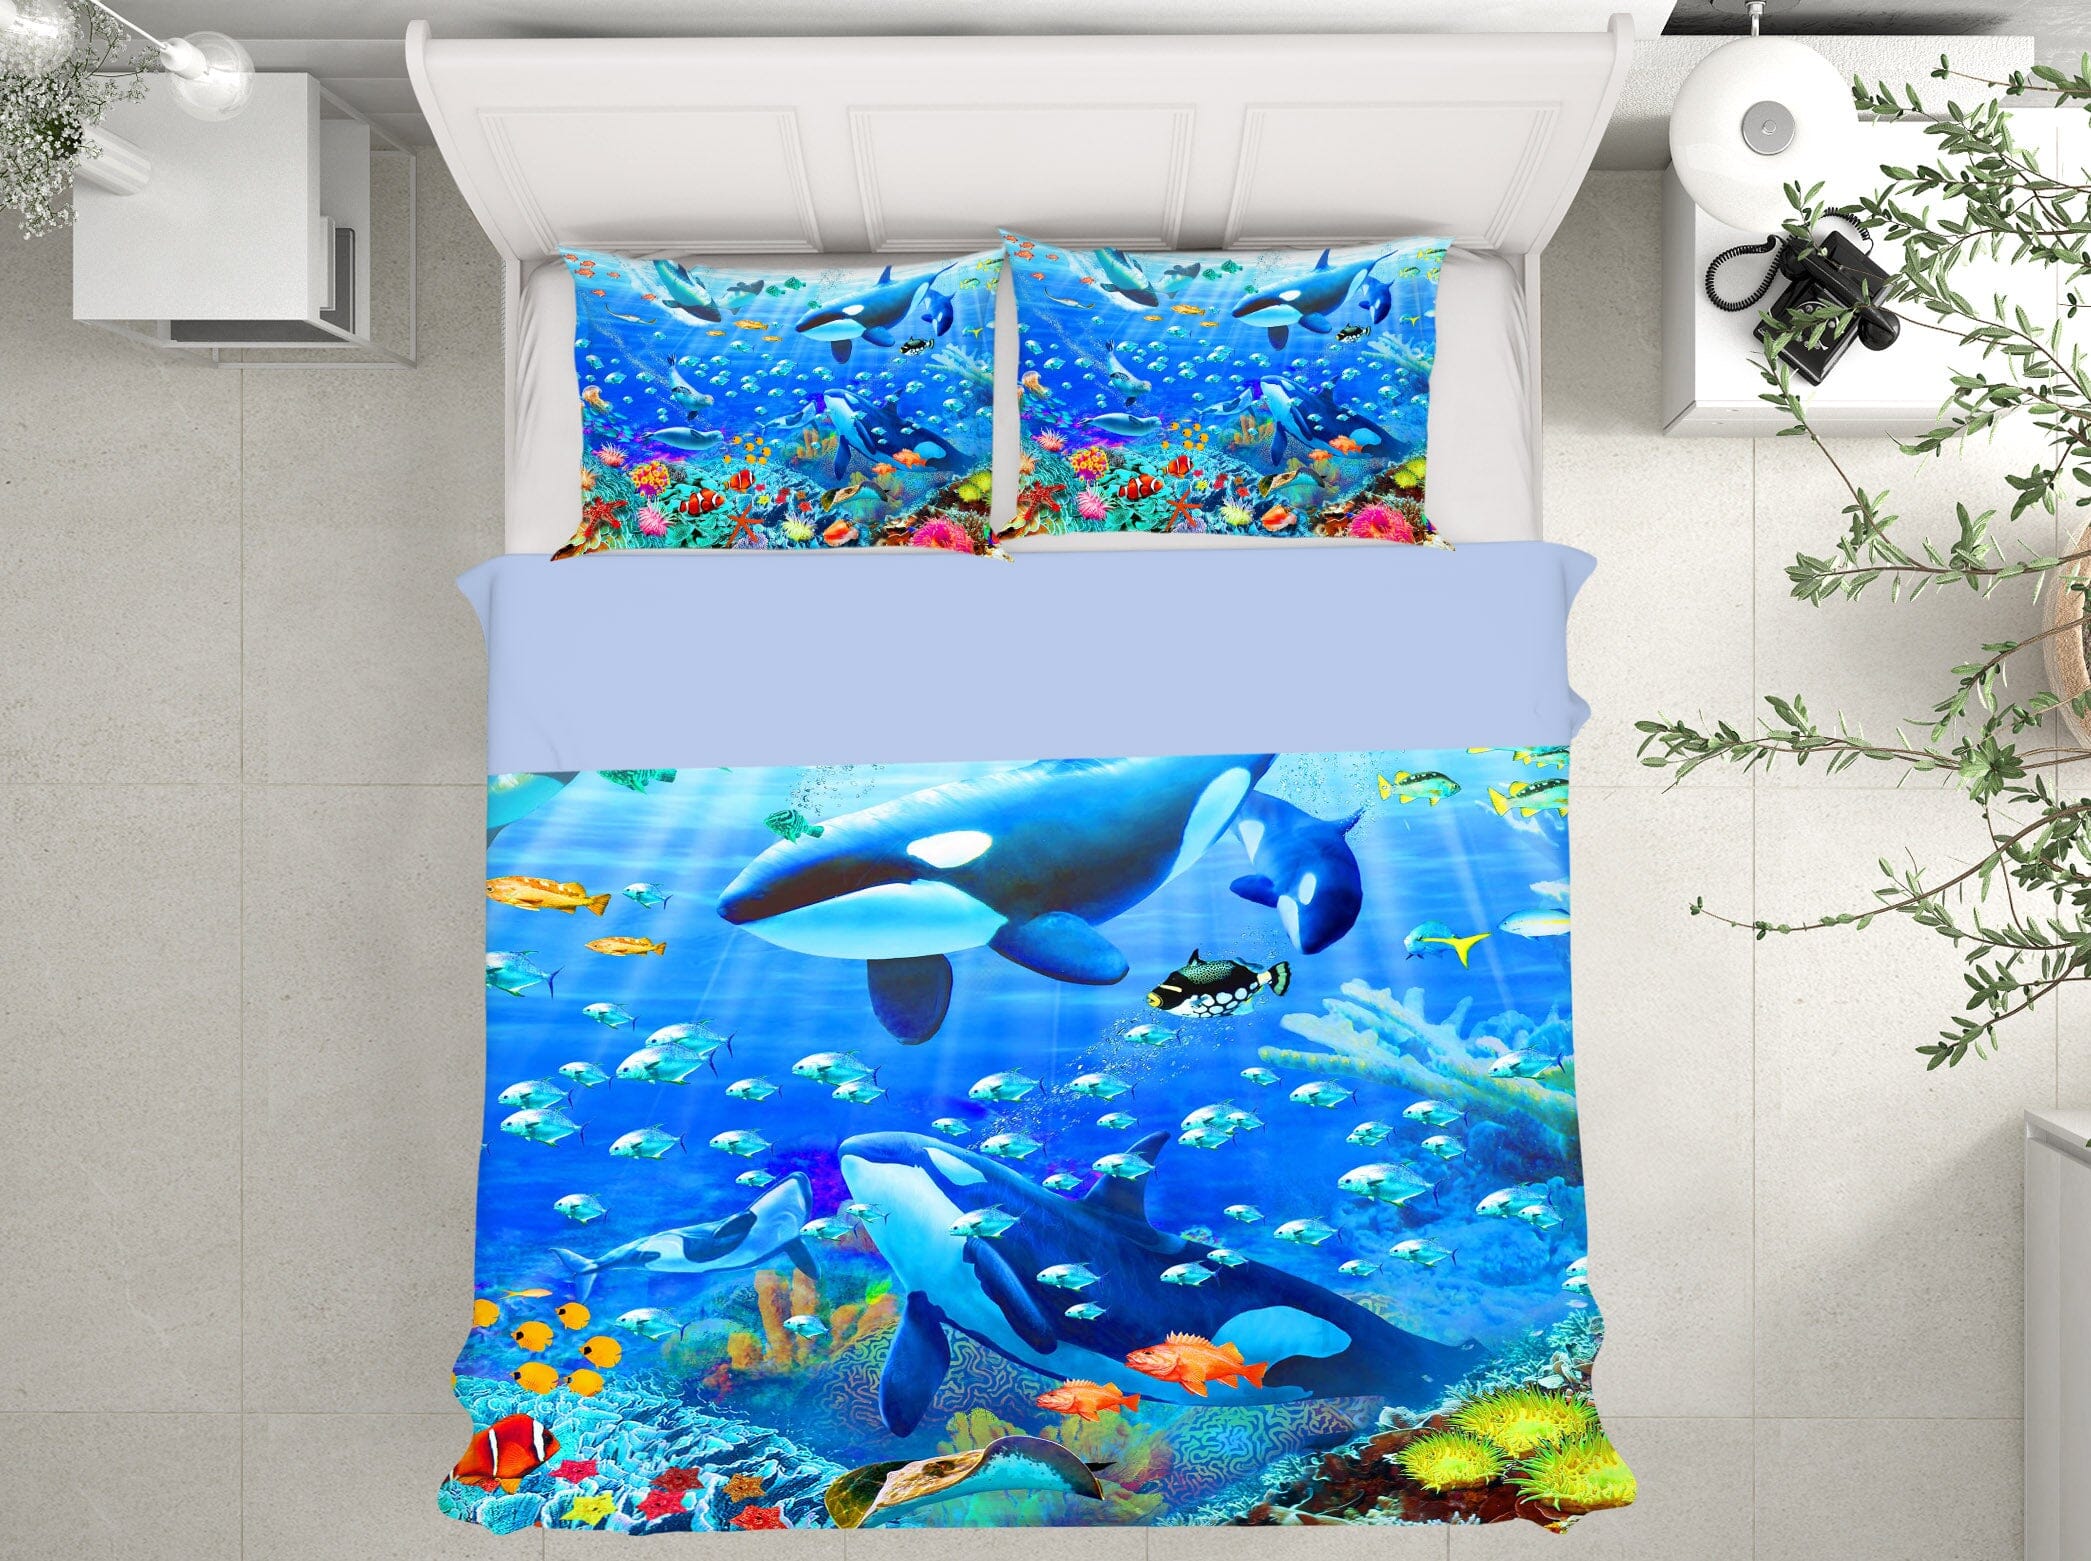 3D The Underwater World 2112 Adrian Chesterman Bedding Bed Pillowcases Quilt Quiet Covers AJ Creativity Home 